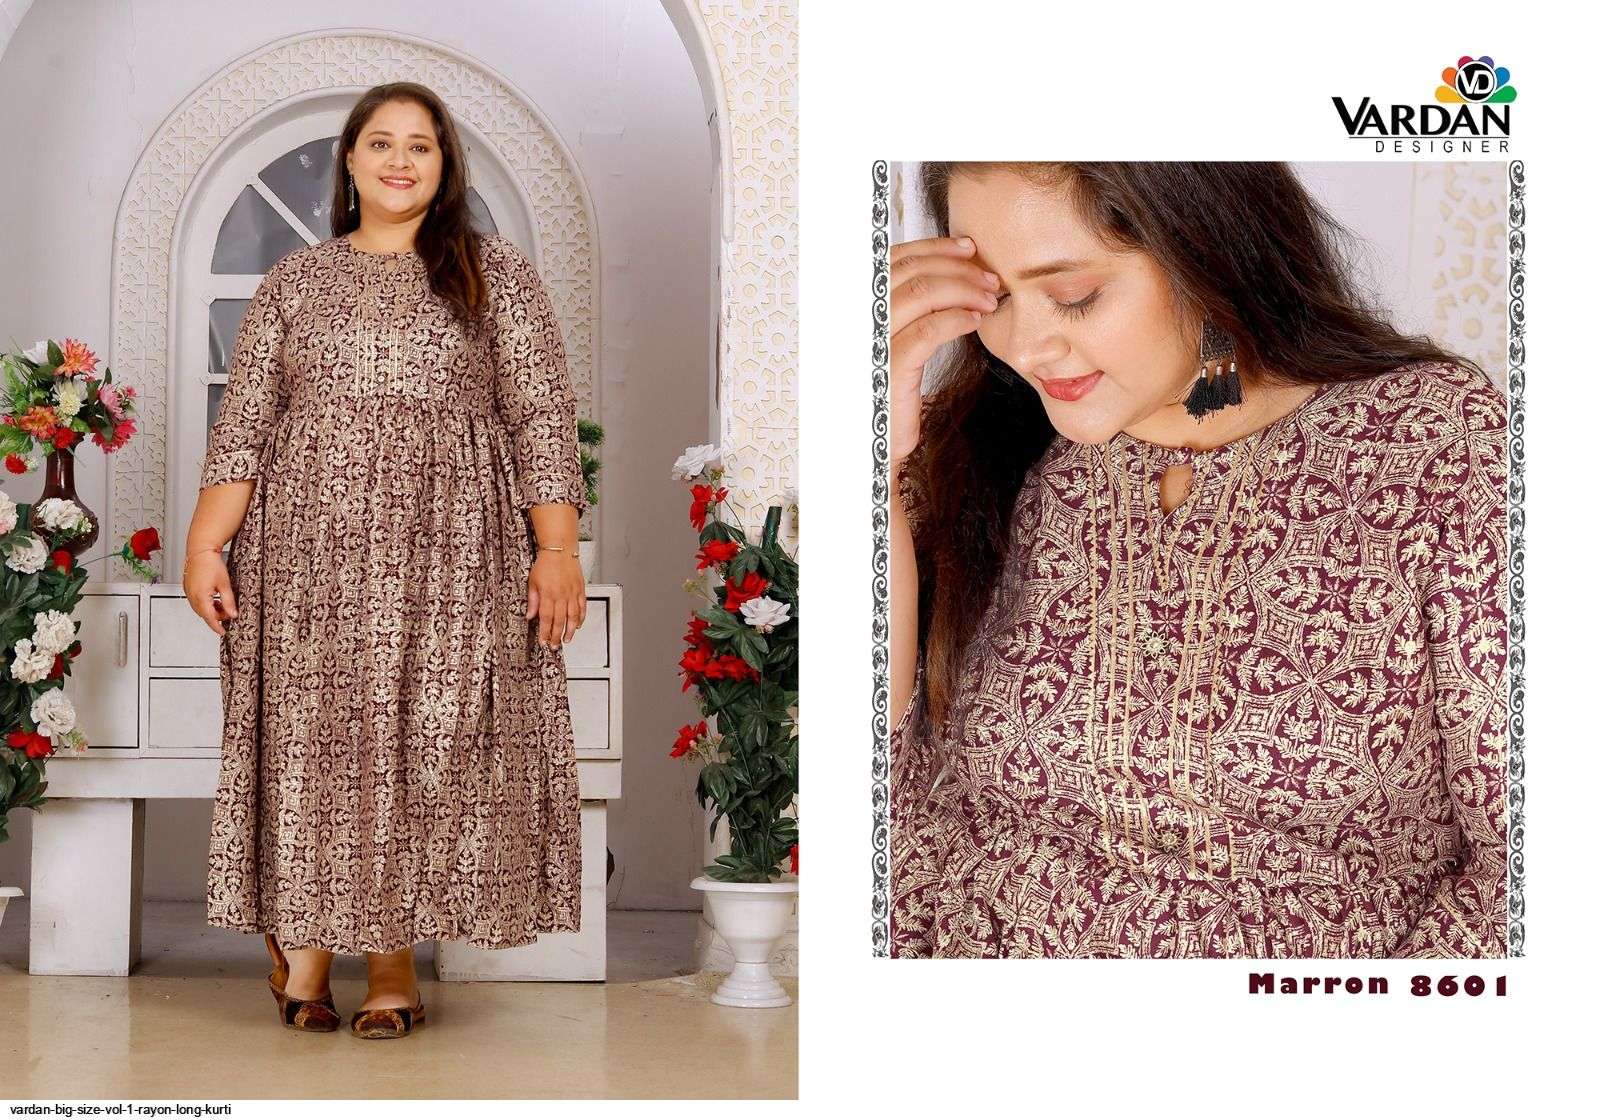 Big Size Vol-1 By Vardan Designer 8601 To 8604 Series Beautiful Stylish Fancy Colorful Casual Wear & Ethnic Wear Rayon Print Kurtis At Wholesale Price